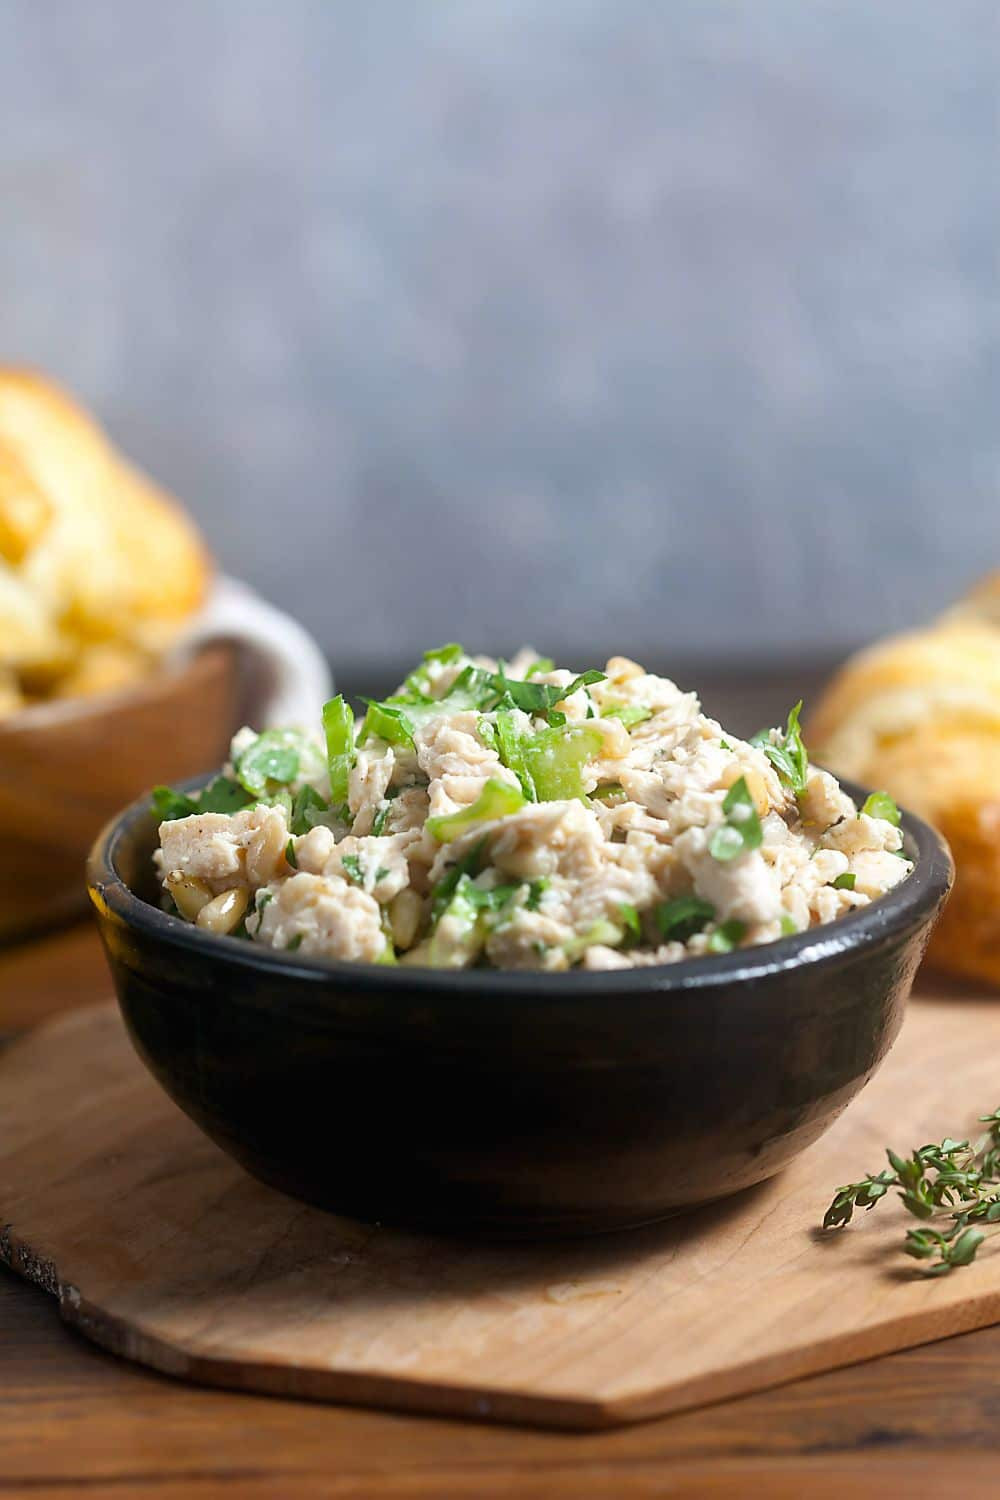 Chicken Salad Without Mayo
 Mayo Free Chicken Salad Sandwiches with Lemon and Herbs